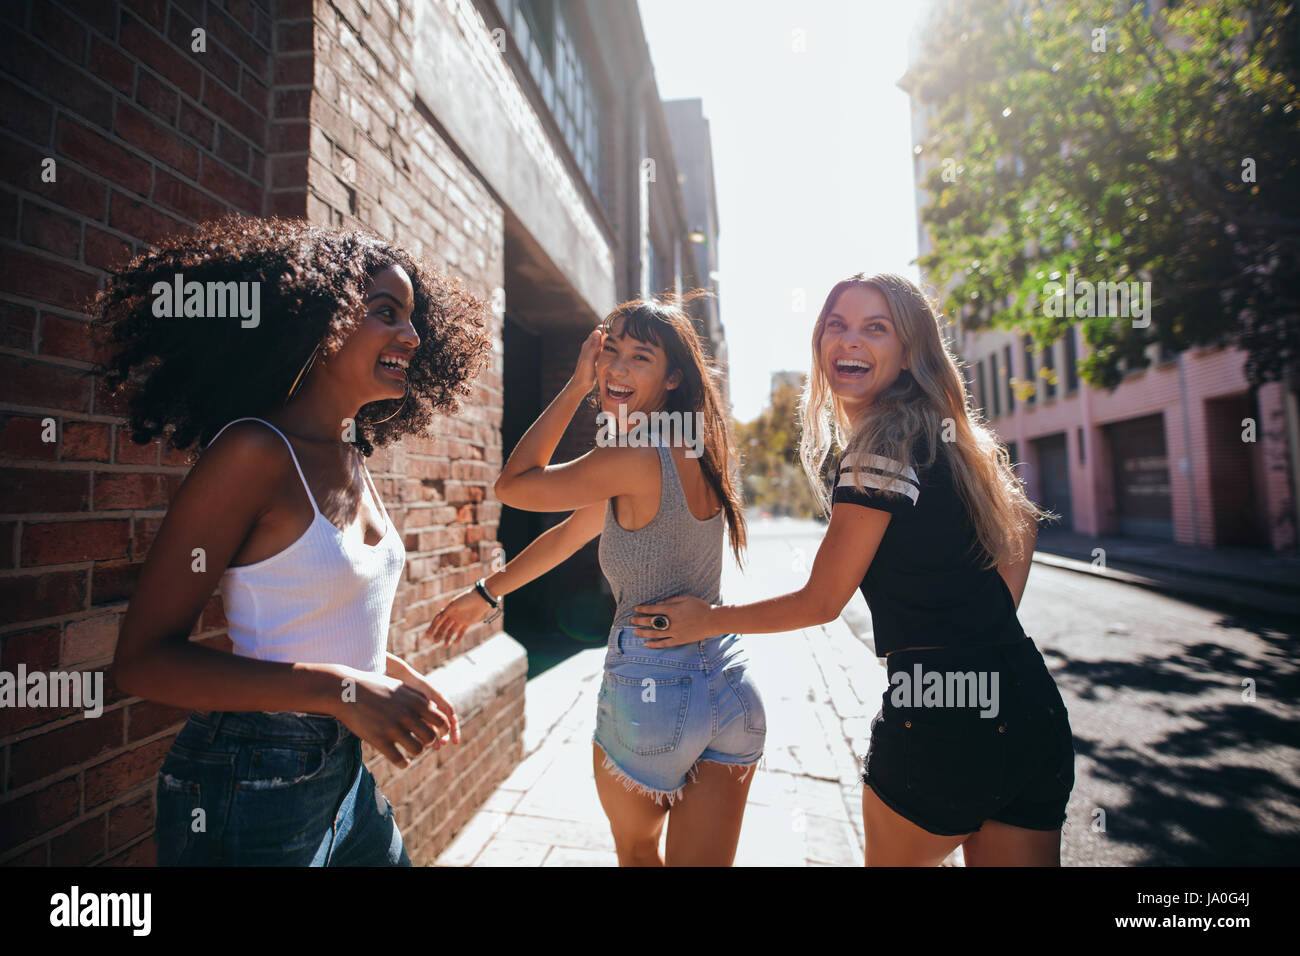 Mixed raced group of friends walking together in city. Three young people having fun outdoors on road. Stock Photo